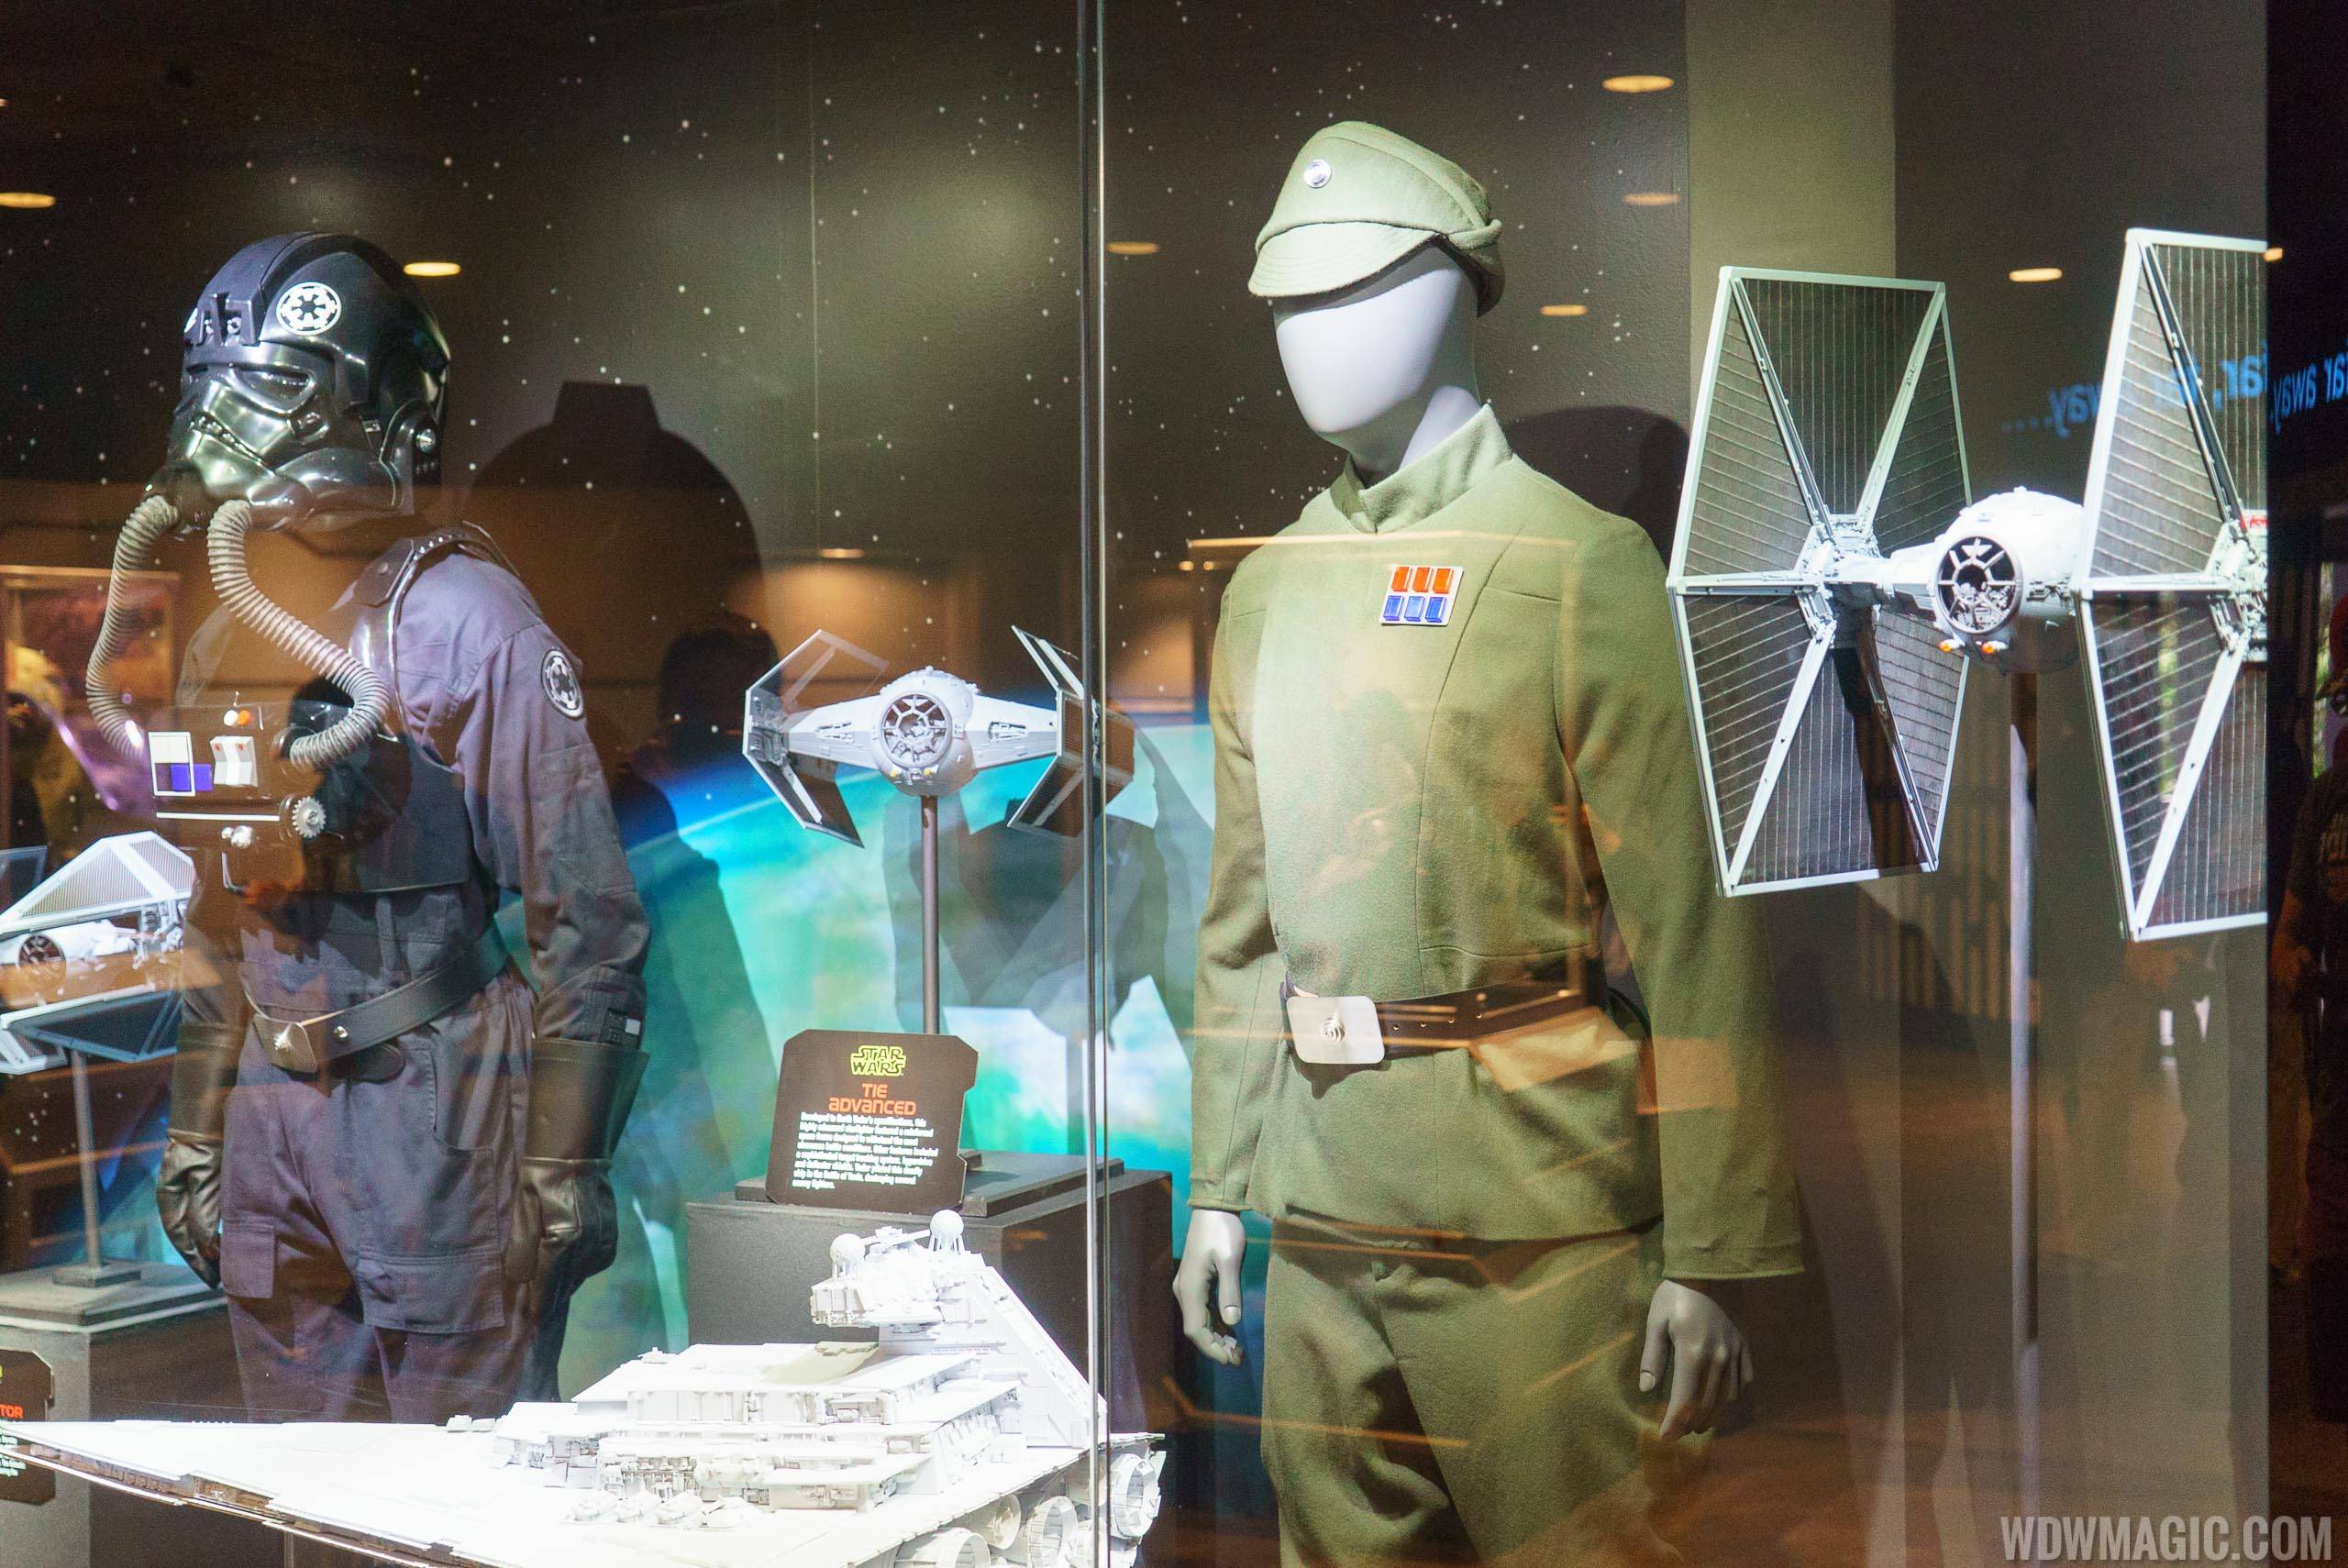 Star Wars Launch Bay - Celebration Gallery costumes